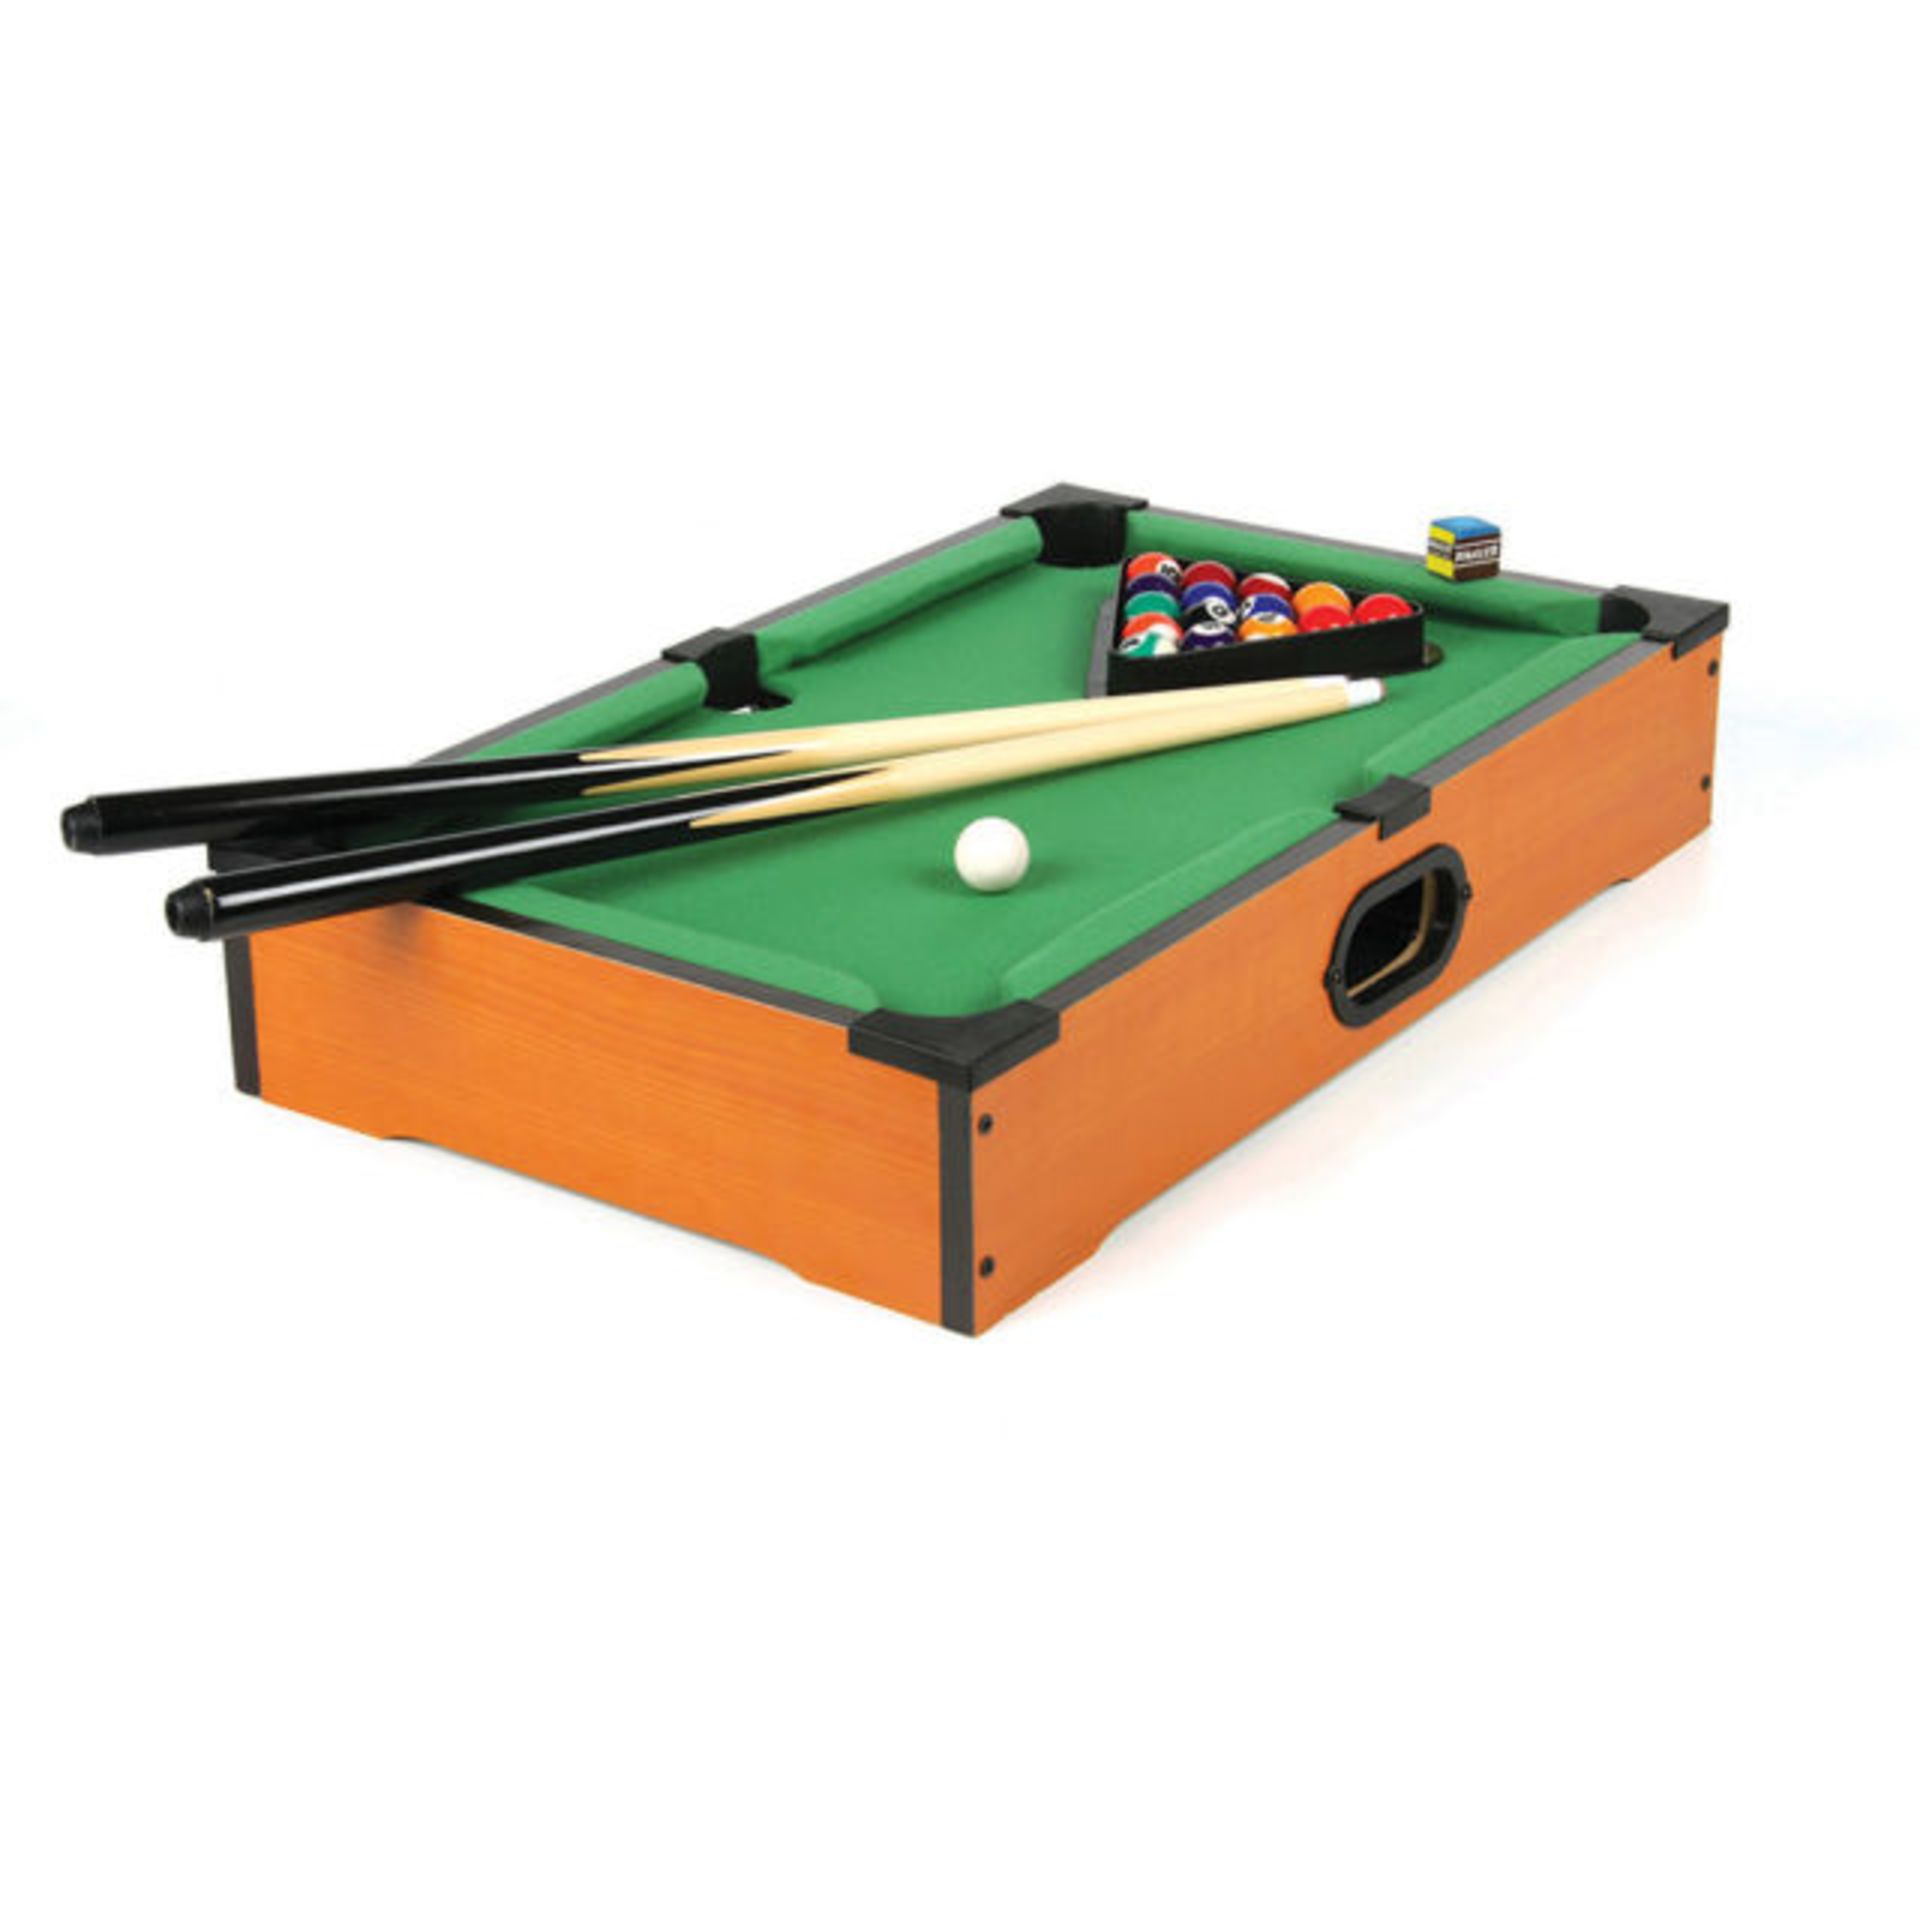 V Brand New Table Top Pool - eBay Price £29.41 - Coloured & Numbered Balls Inc Cue Ball - 2 Pool Cue